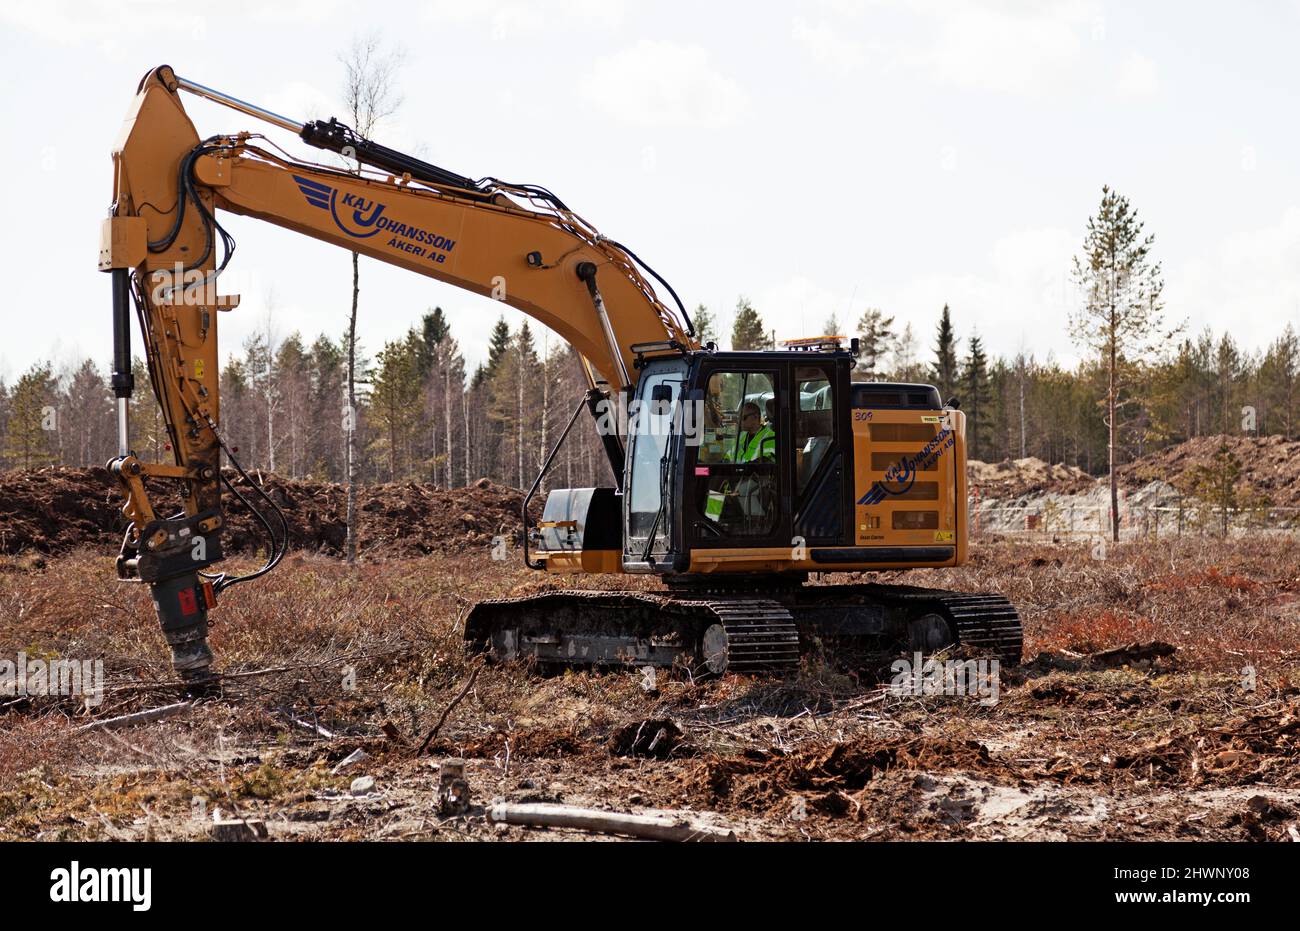 Umea, Norrland Sweden - April 30, 2020: tree felling machine on clear-cutting Stock Photo